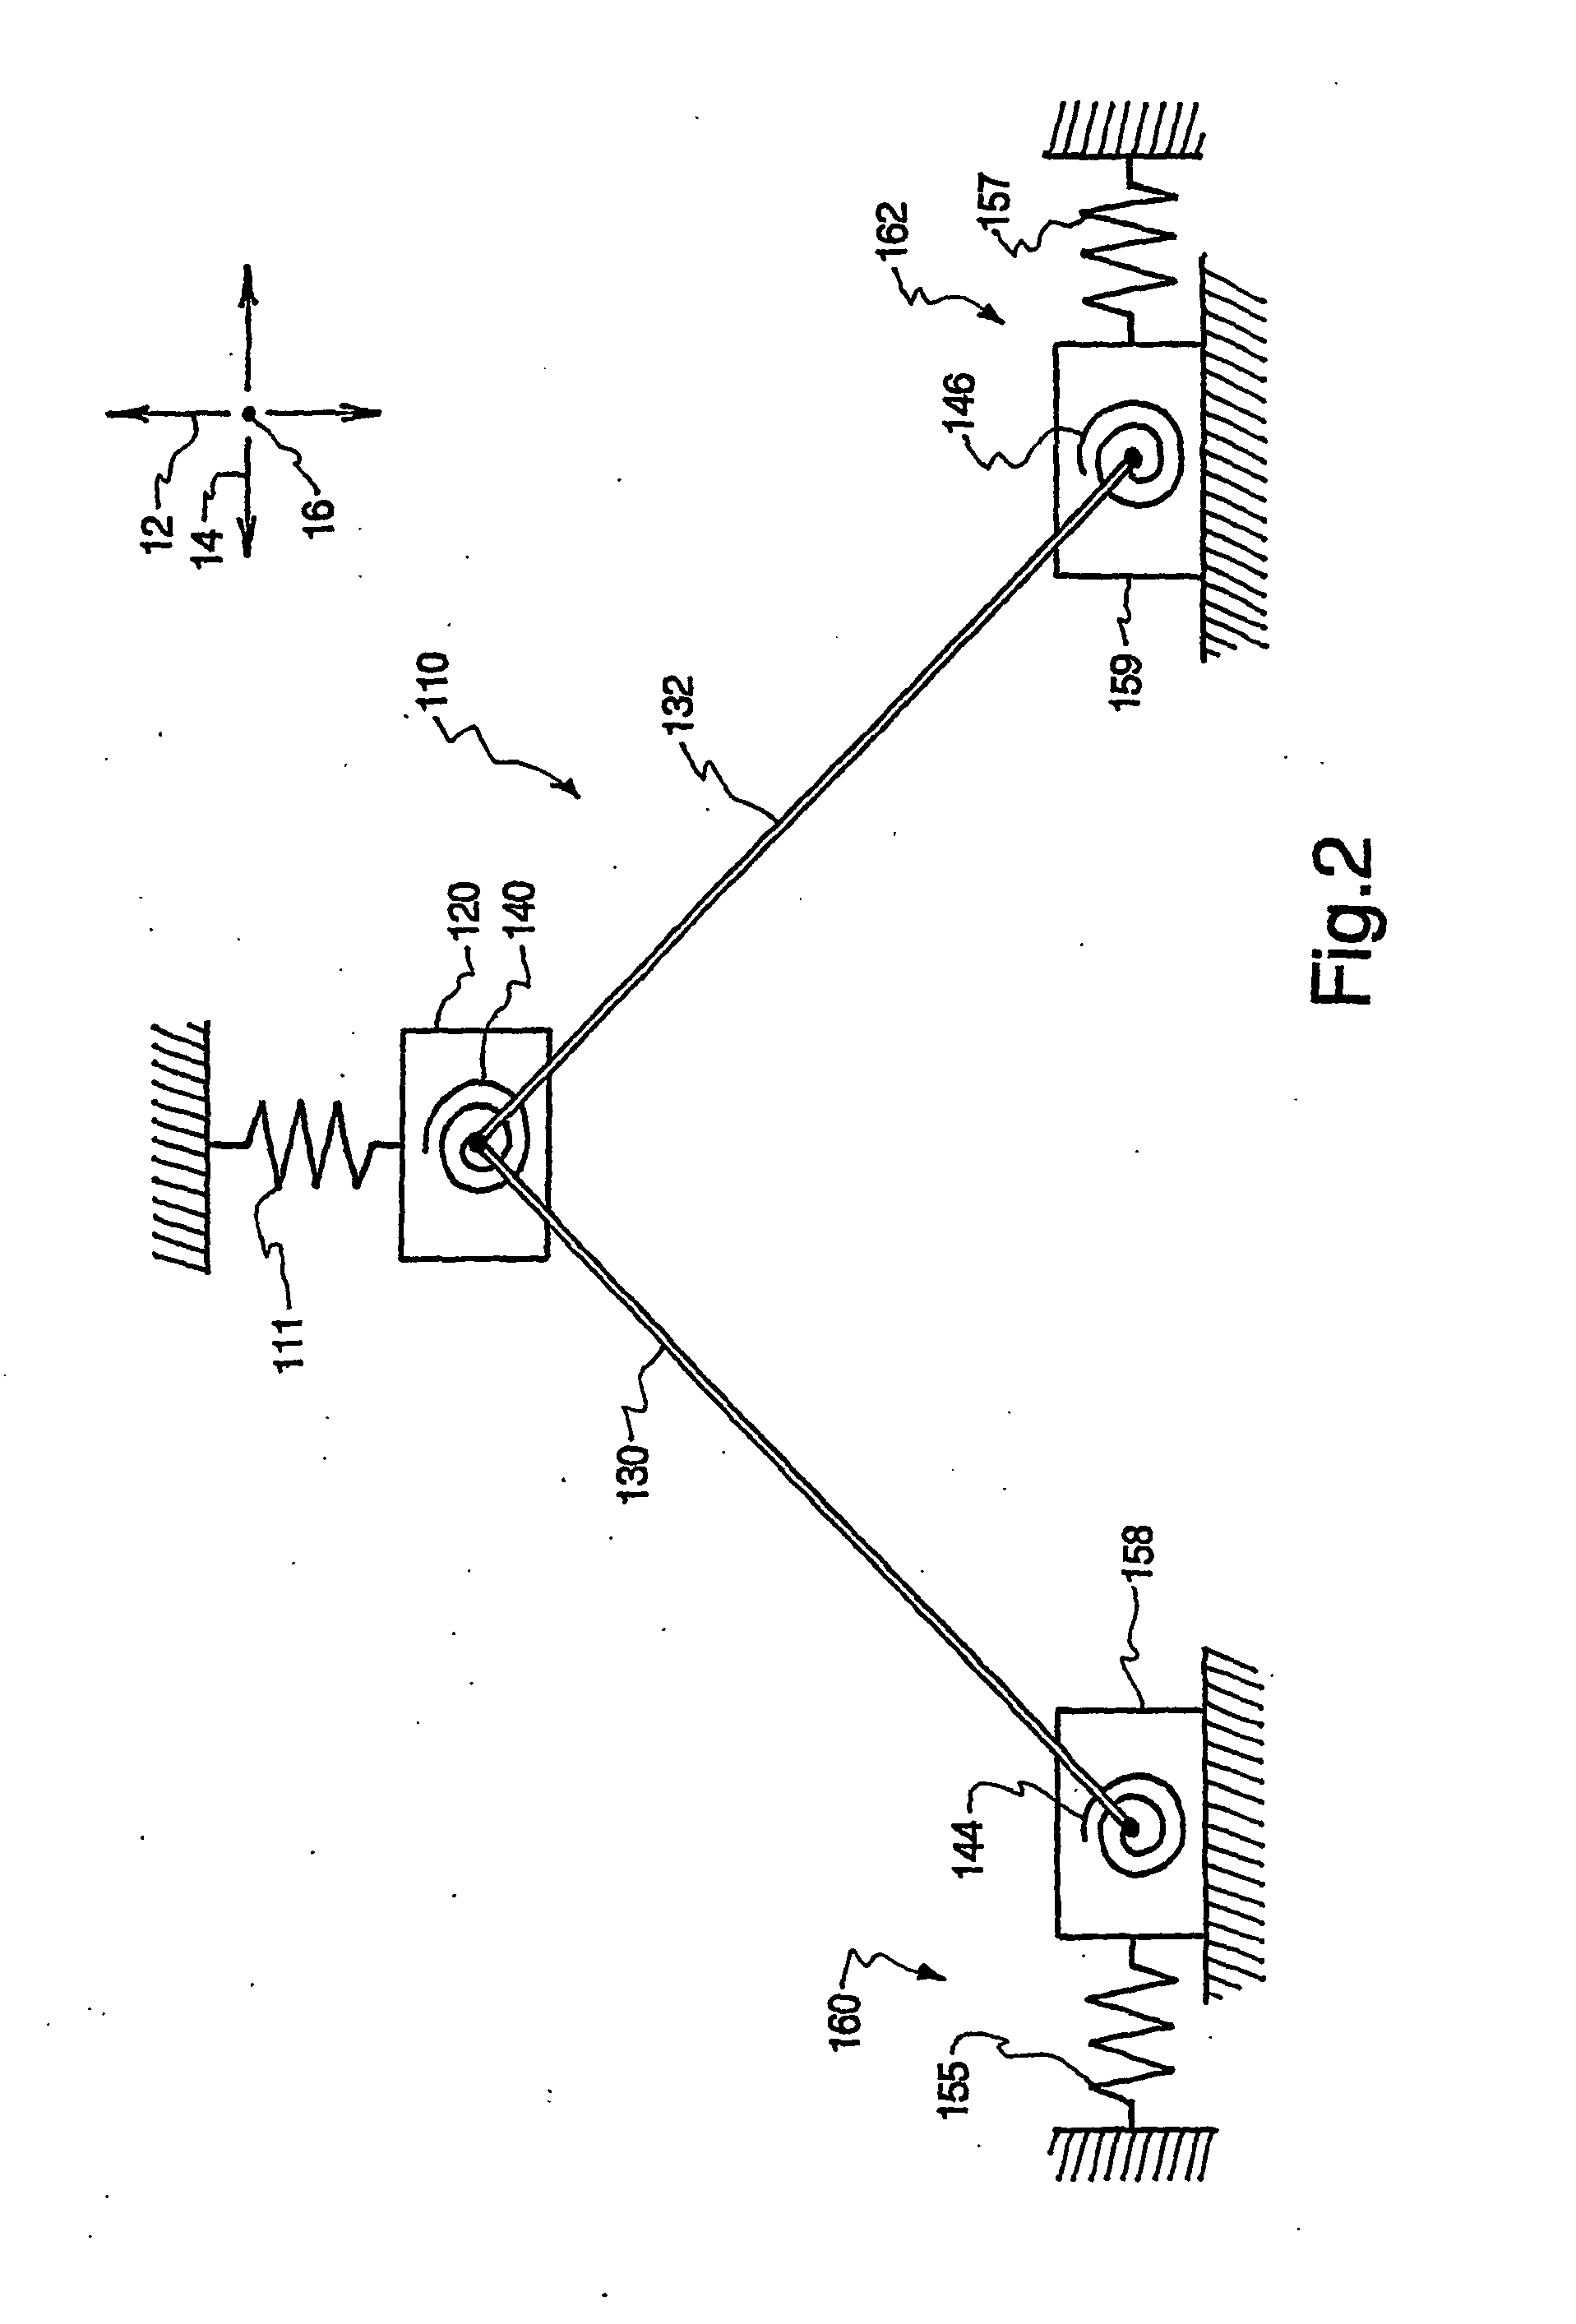 Dual position linear displacement micromechanism